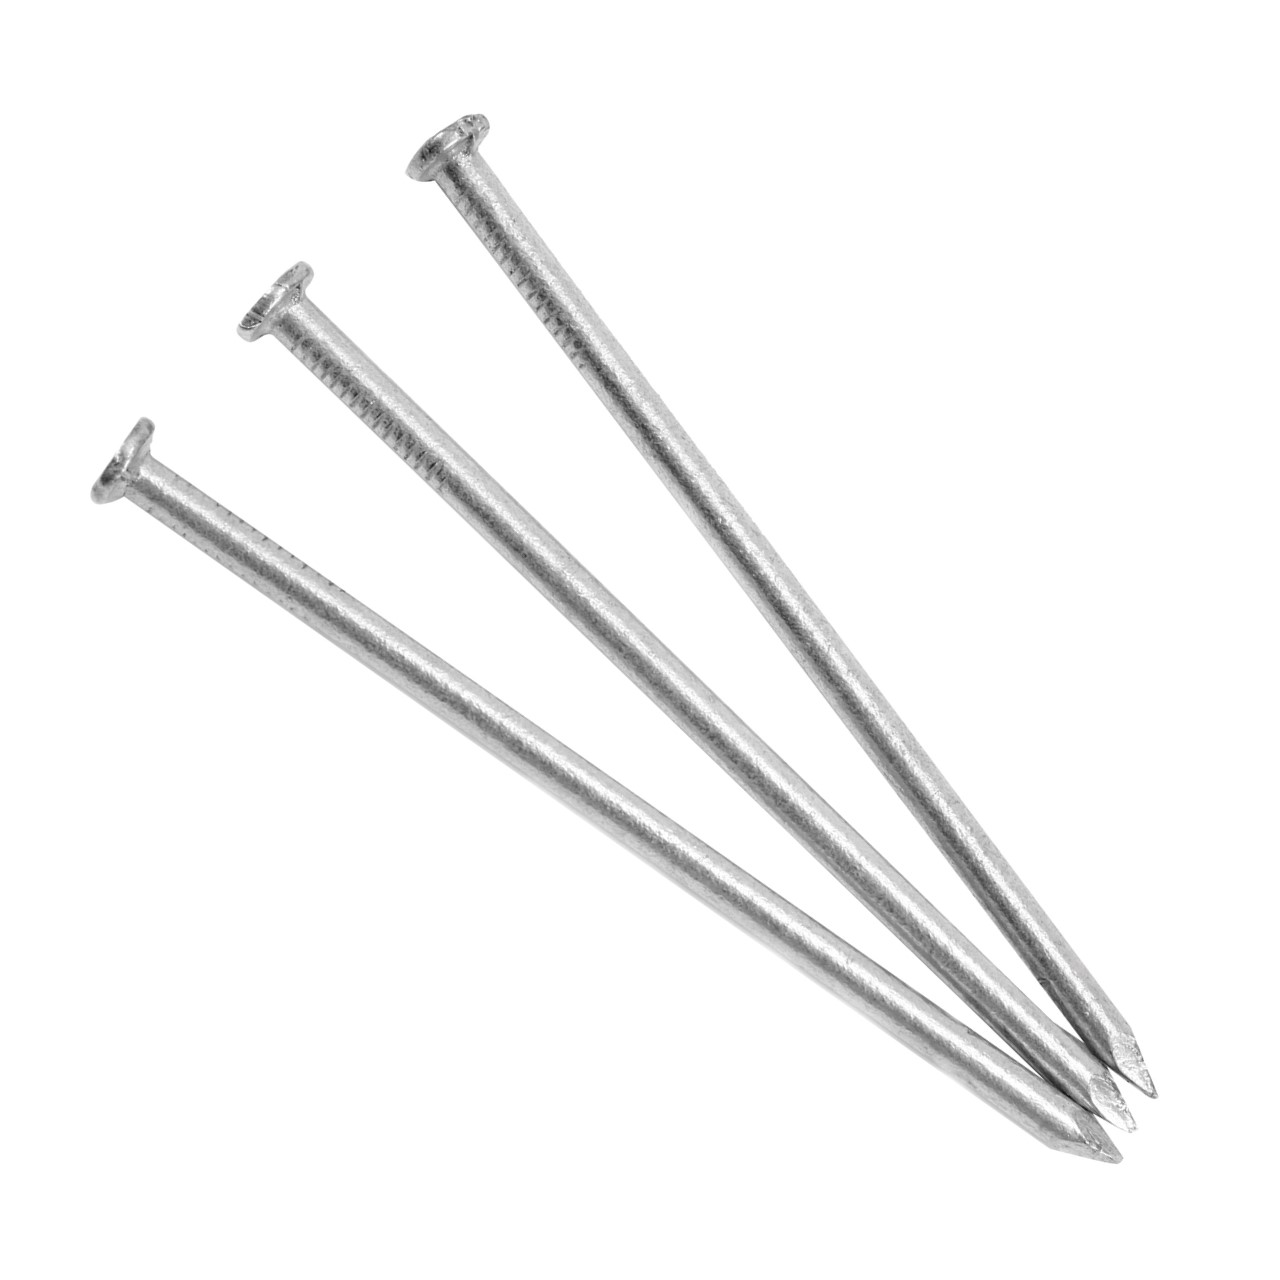 Wickes 125mm Bright Round Wire Nails - 2kg | Wickes.co.uk